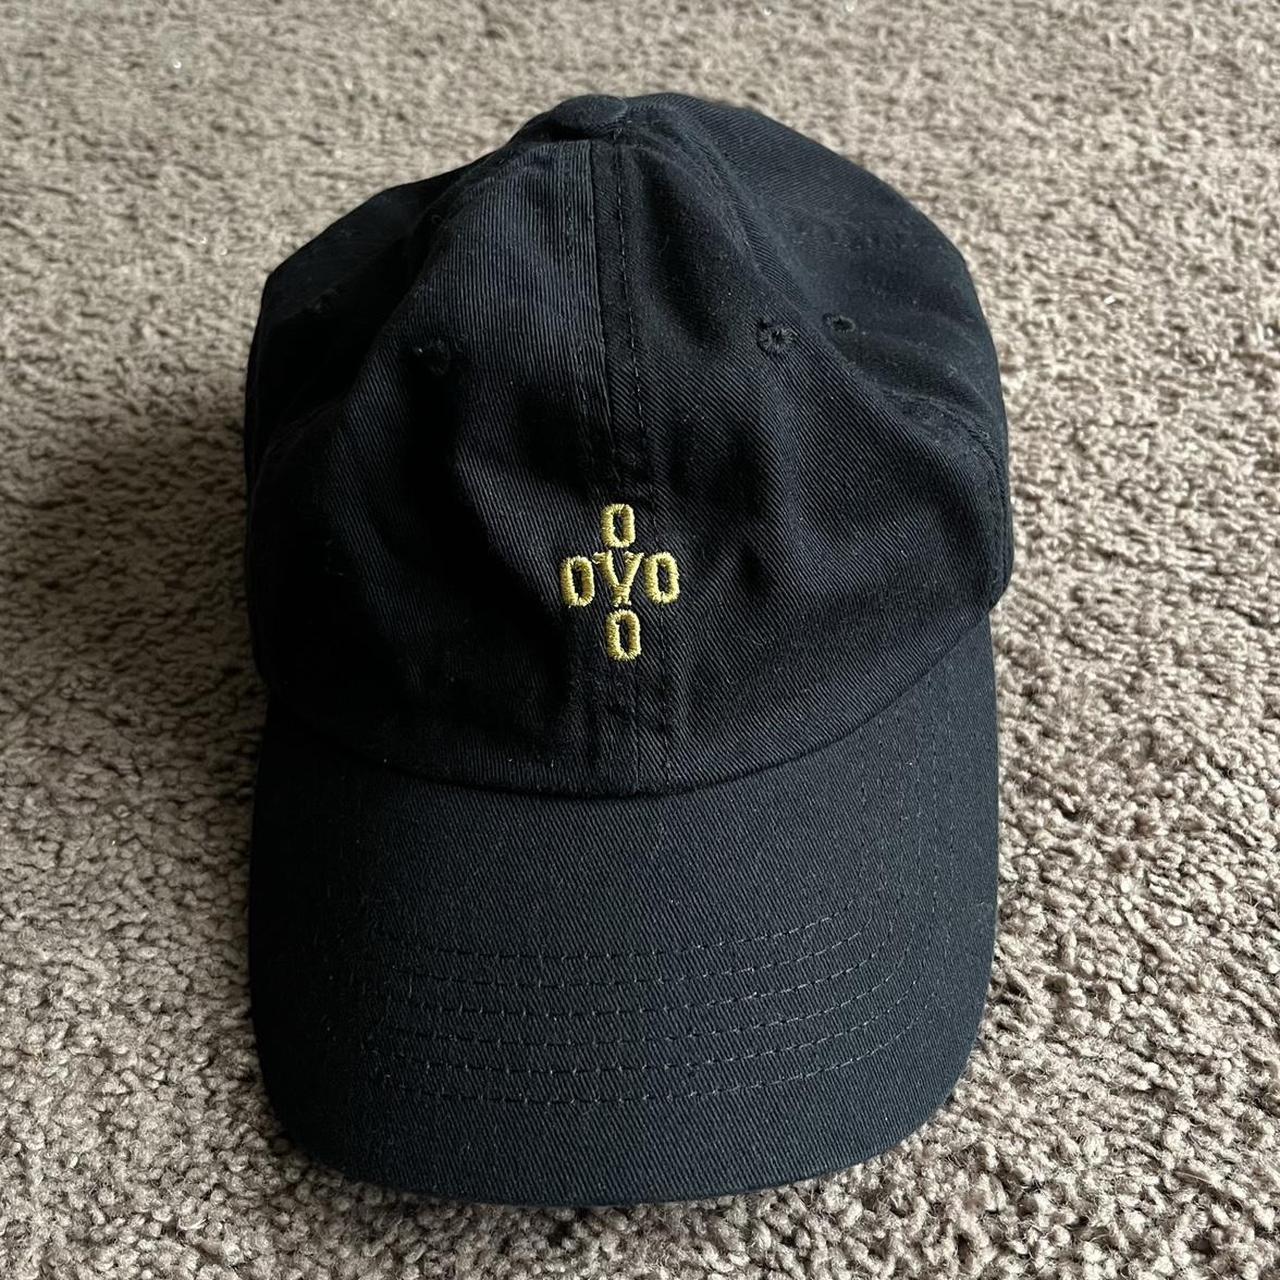 item listed by fuckdepopfees